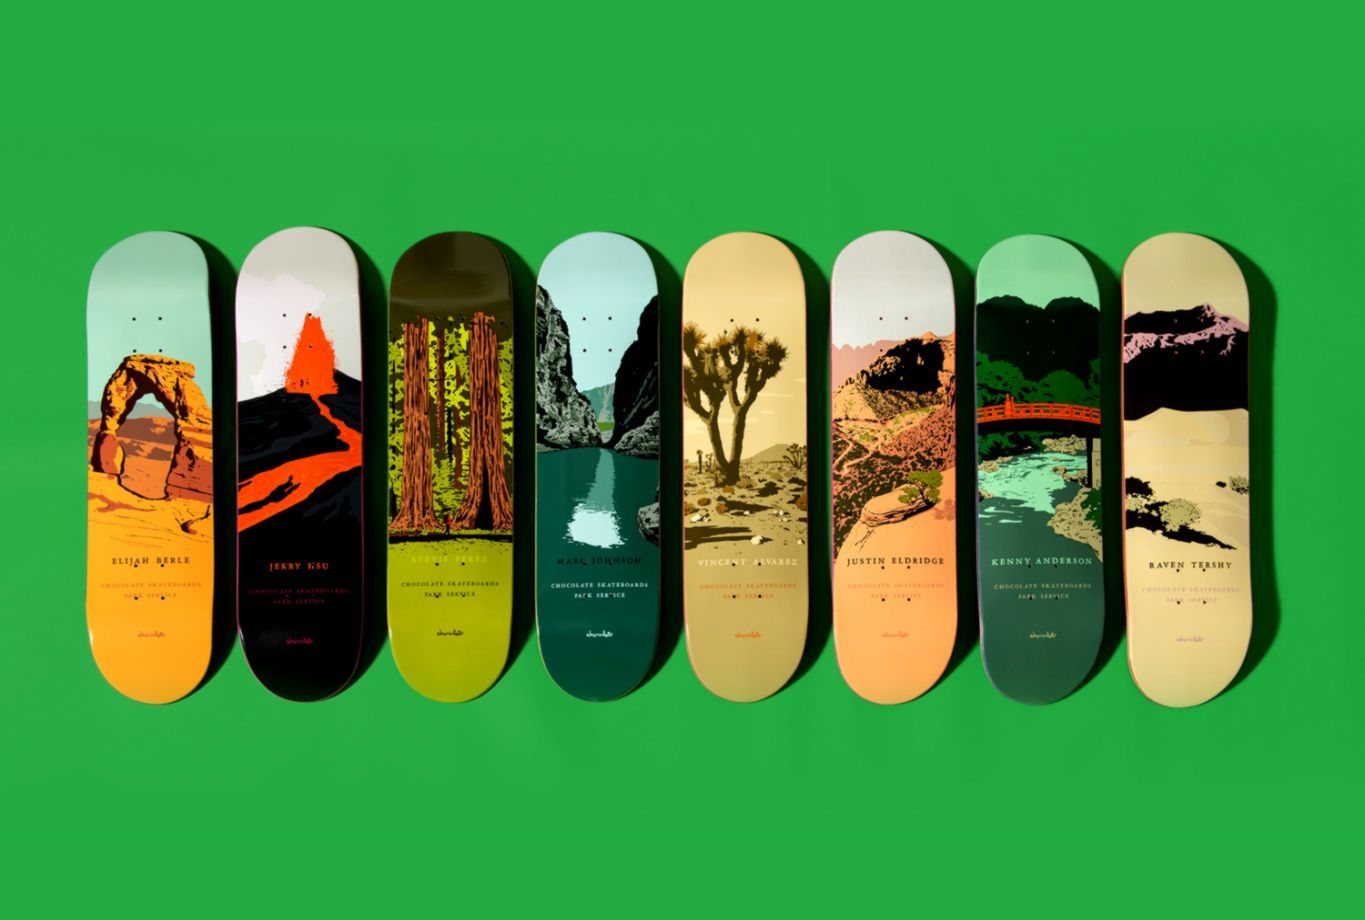 Chocolate Skateboards Wallpapers